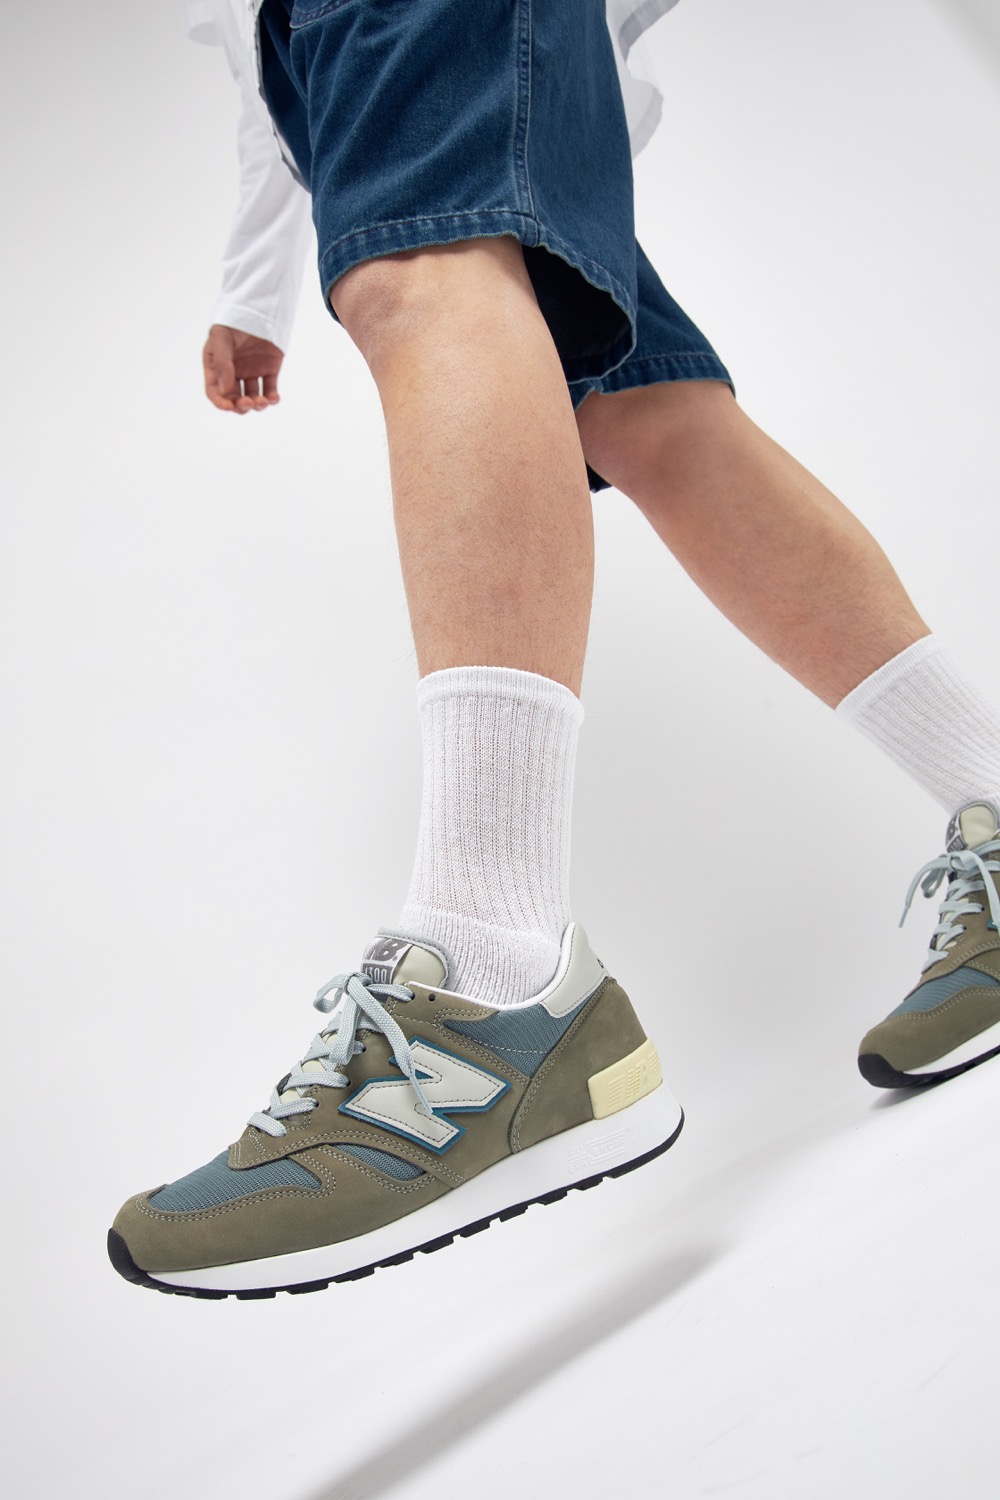 New Balance Revisit a Modern Classic With the M1300JP3 | END.